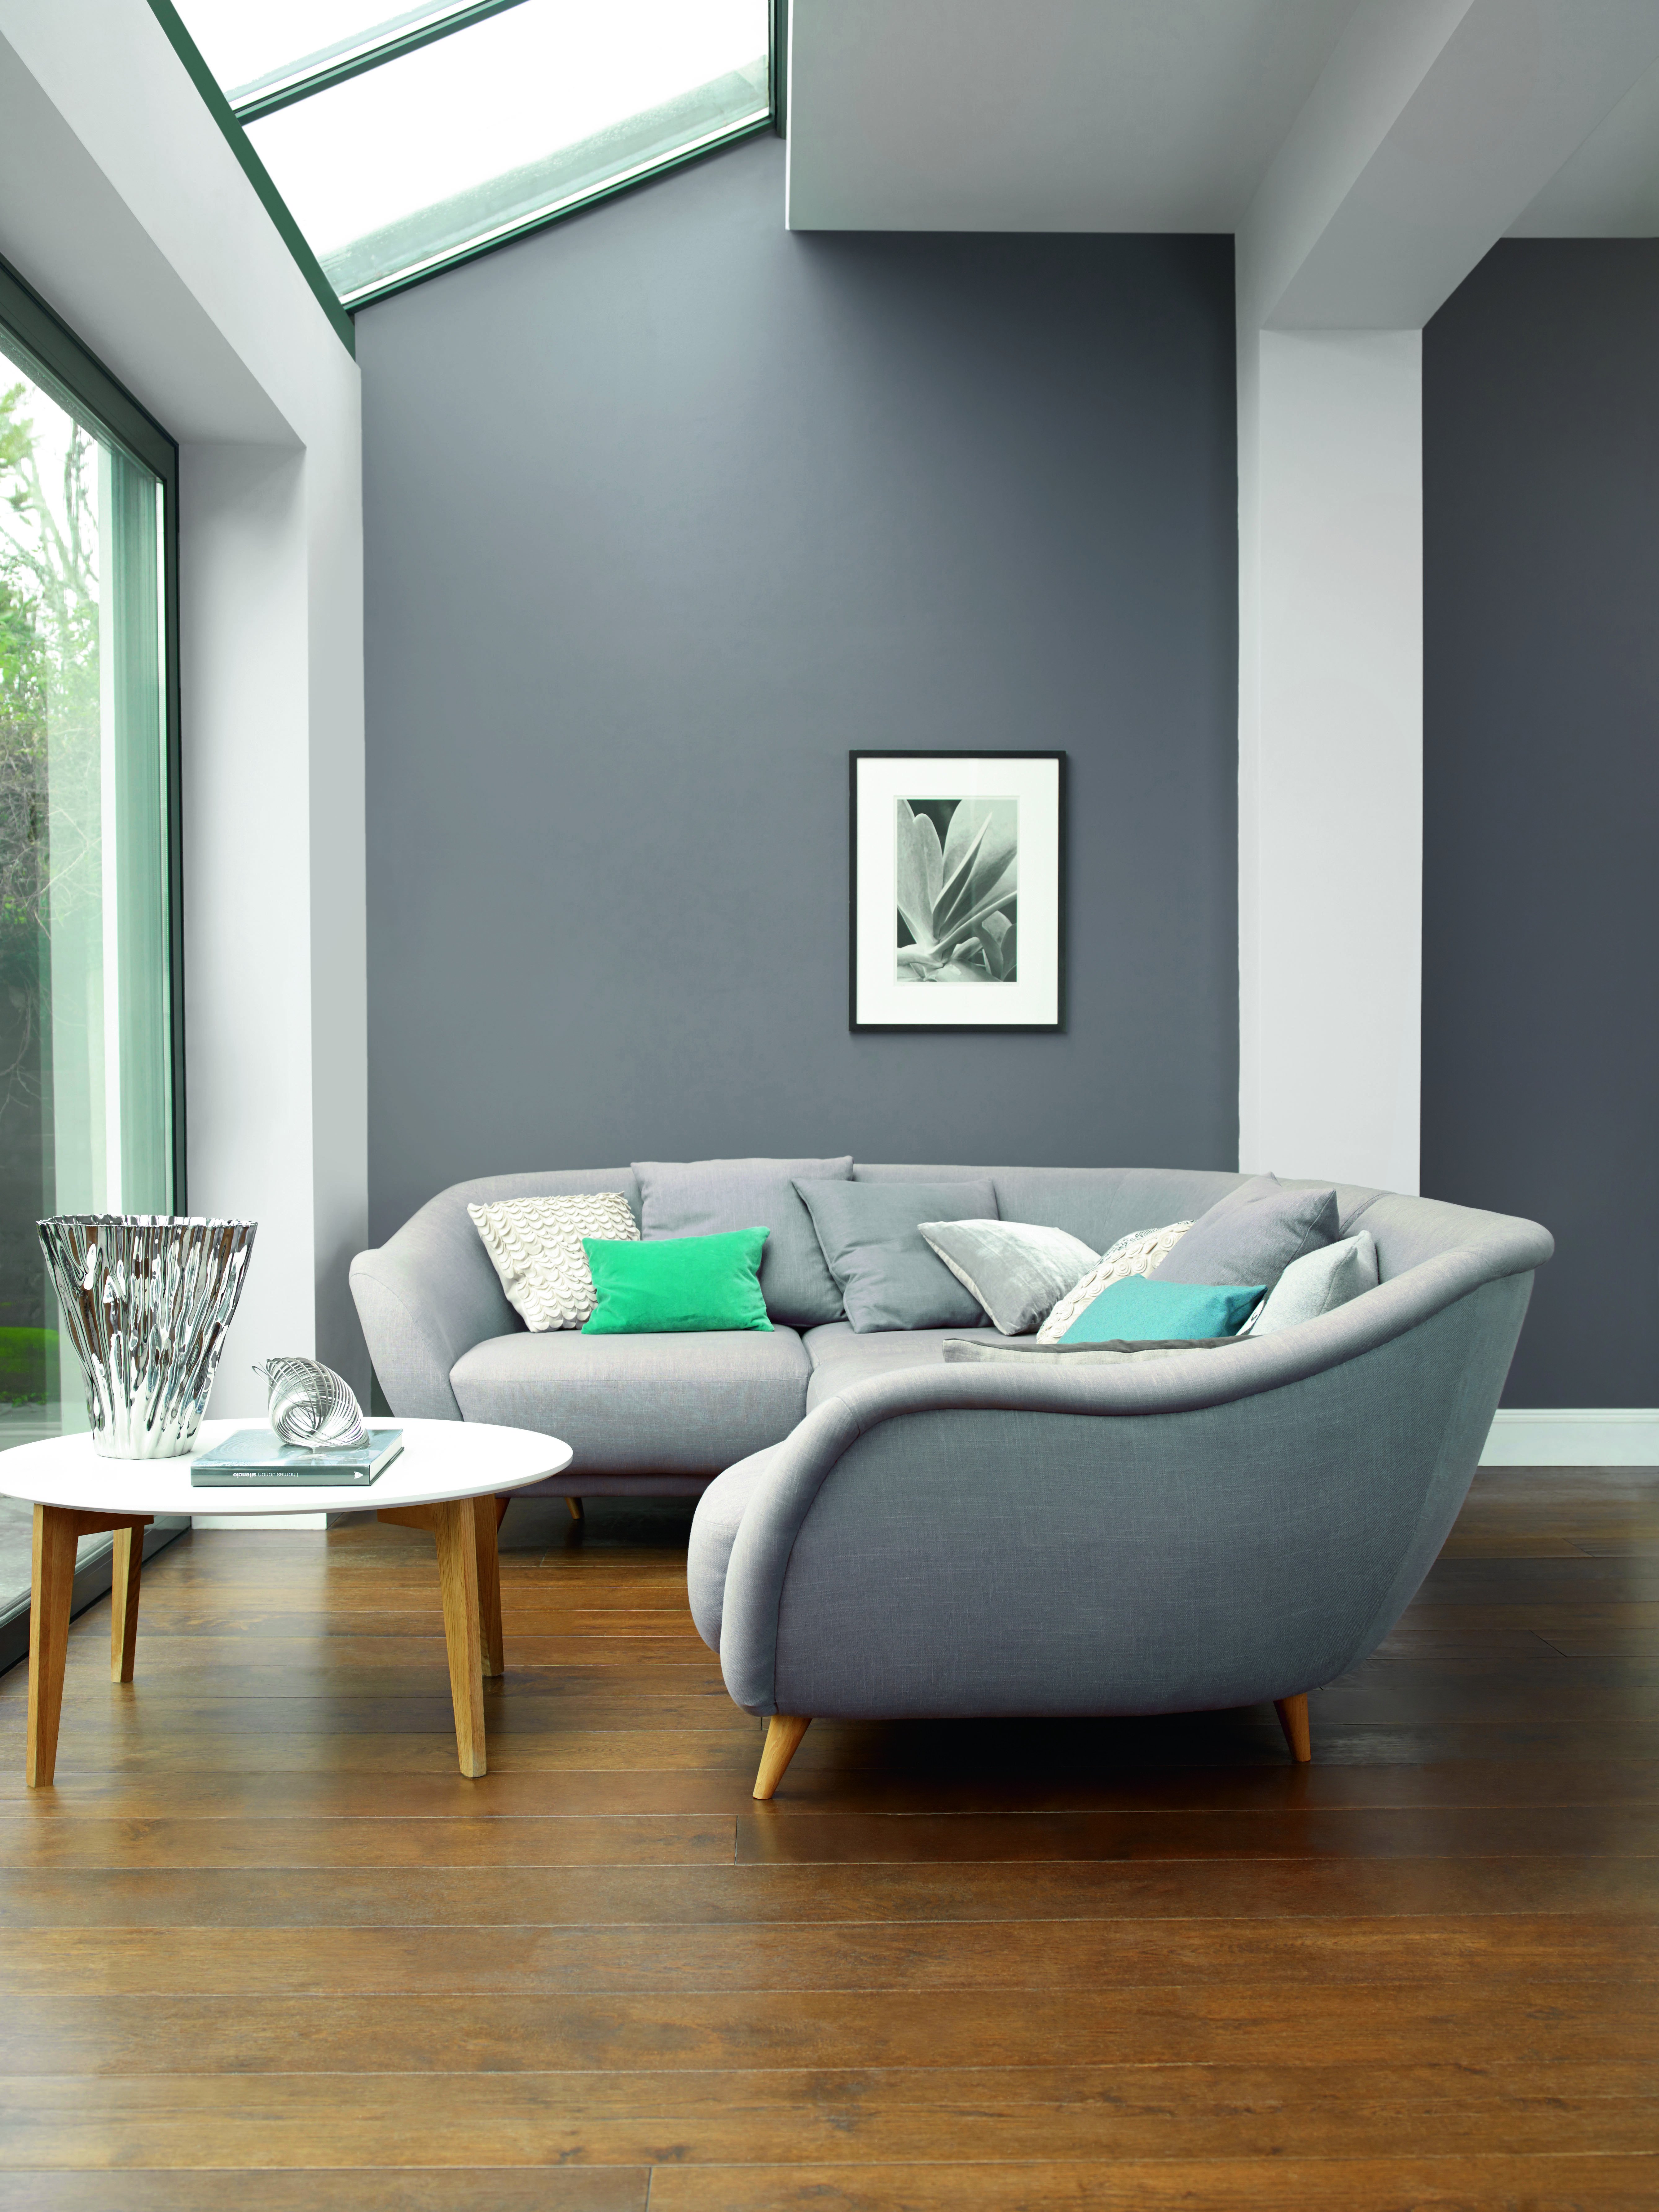 White Paint Guide for Living Room Decorating Luxury the Dulux Guide to Grey Interiors Decorating Ideas Colour Trends